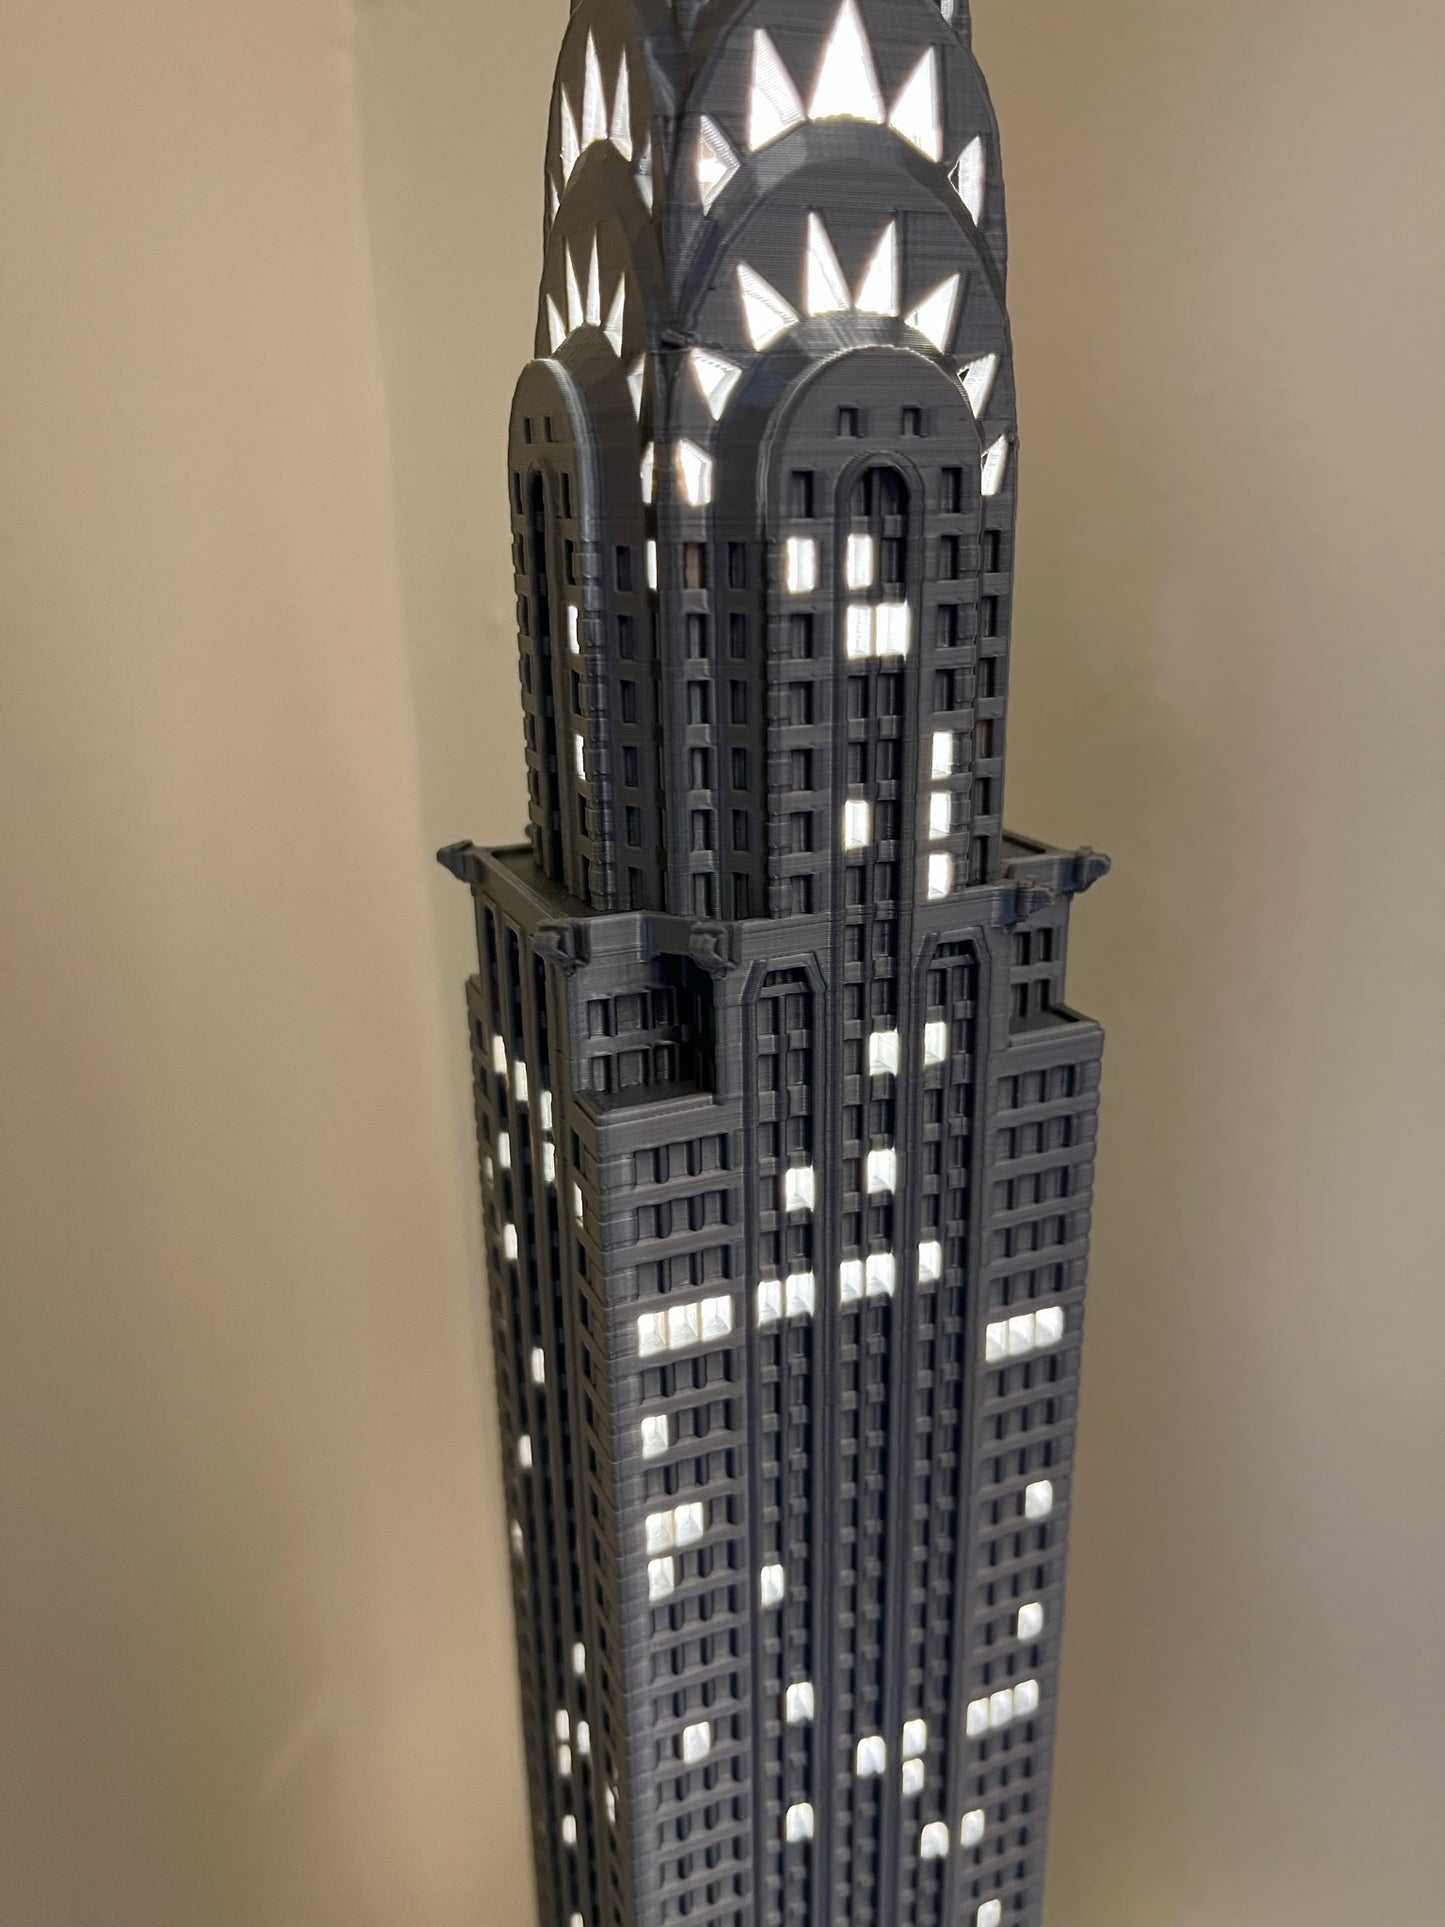 Chrysler Building Light Up Model- 3D Printed (First Edition)